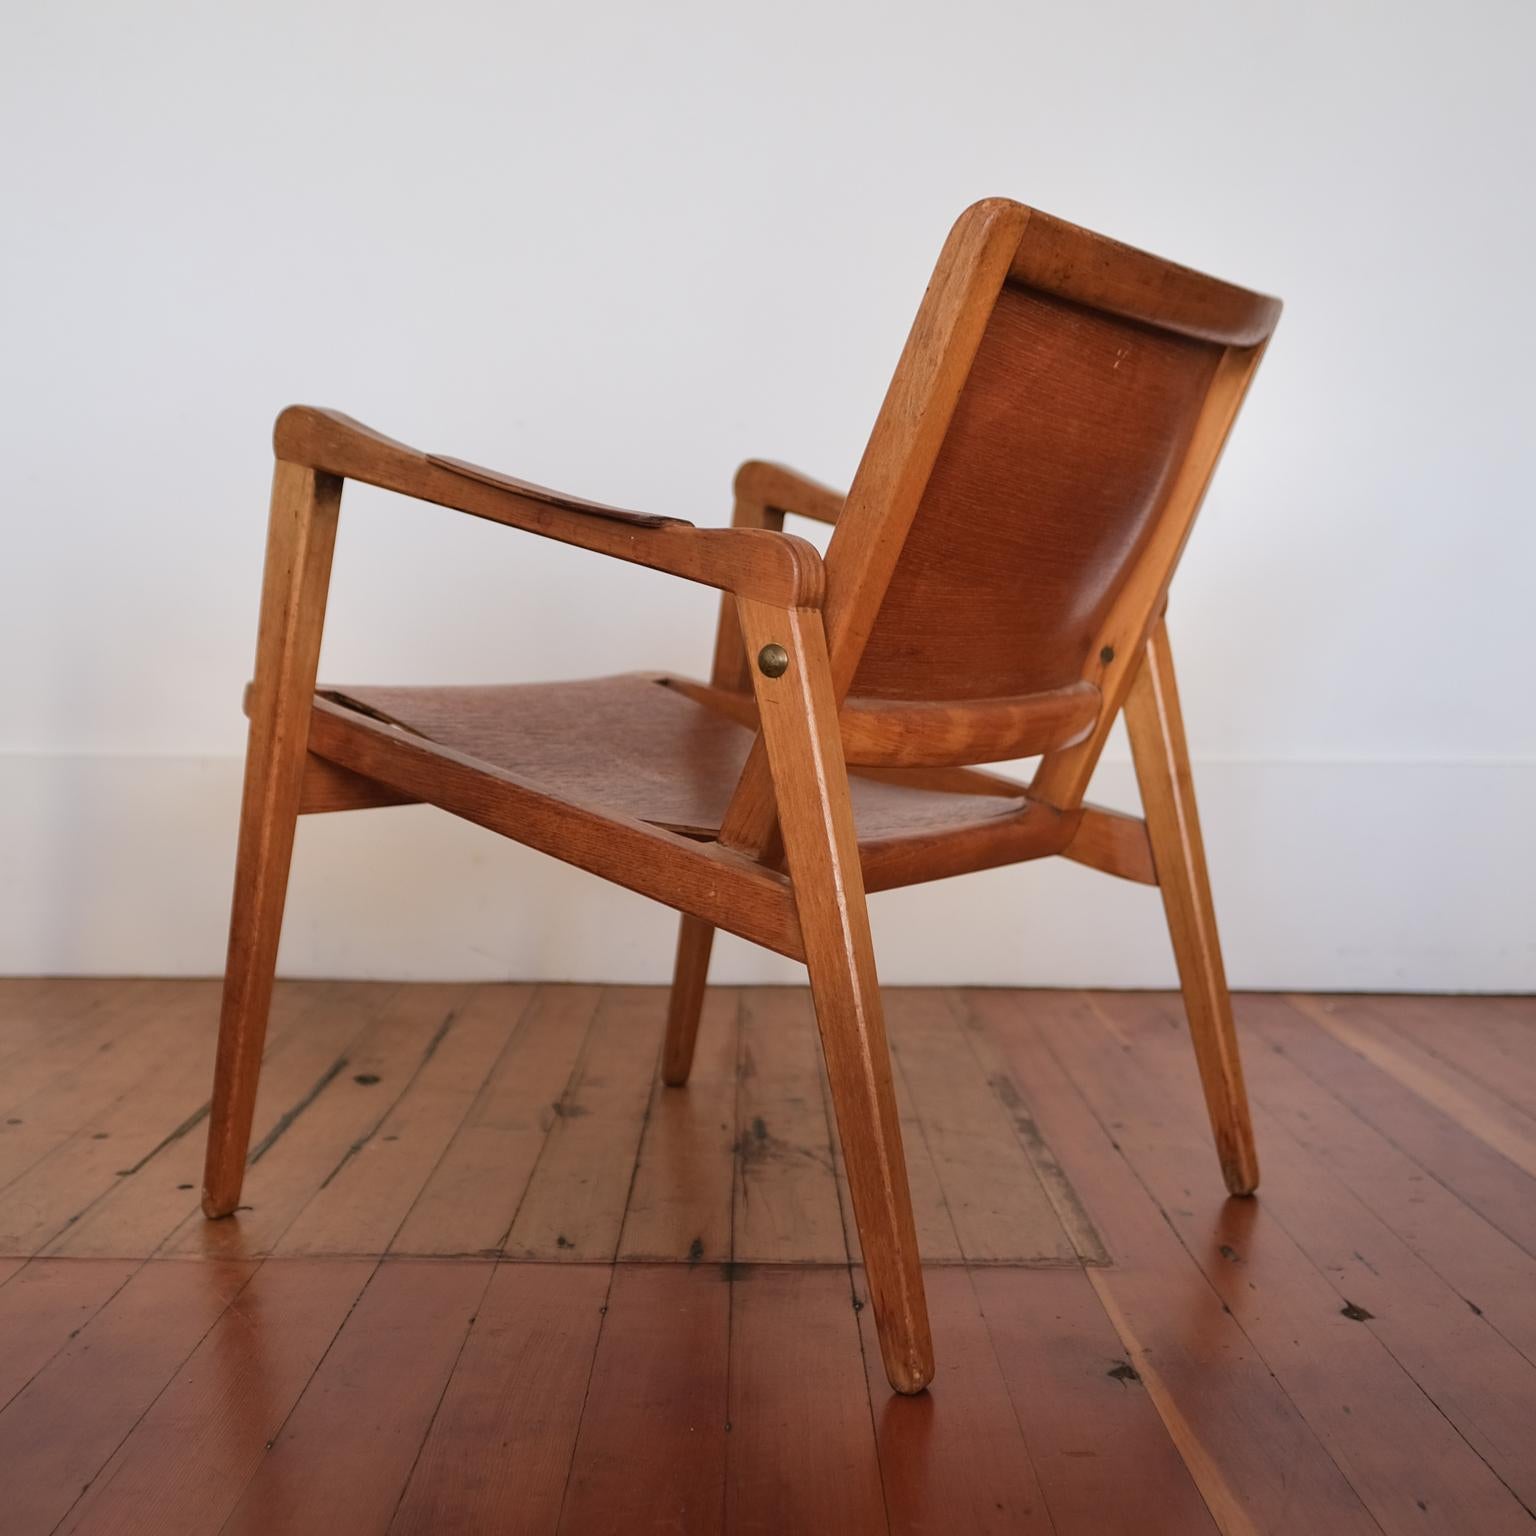 Axel Larsson Lounge Chair, Sweden, 1948 In Good Condition For Sale In San Diego, CA